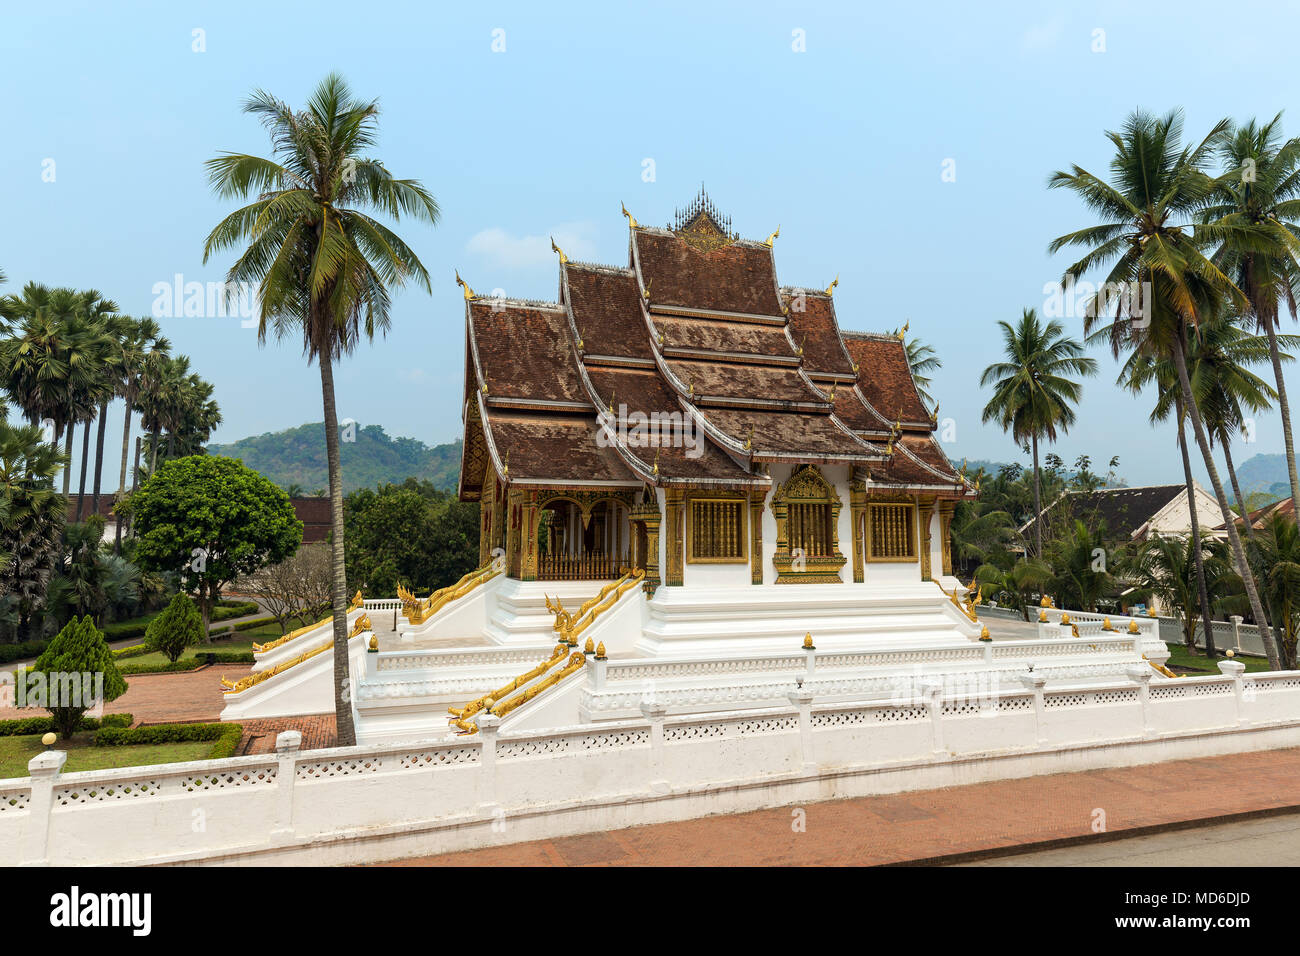 View of the ornate Haw Pha Bang temple, also known as Royal or Palace Chapel. It's located next to the Royal Palace in Luang Prabang, Laos. Stock Photo